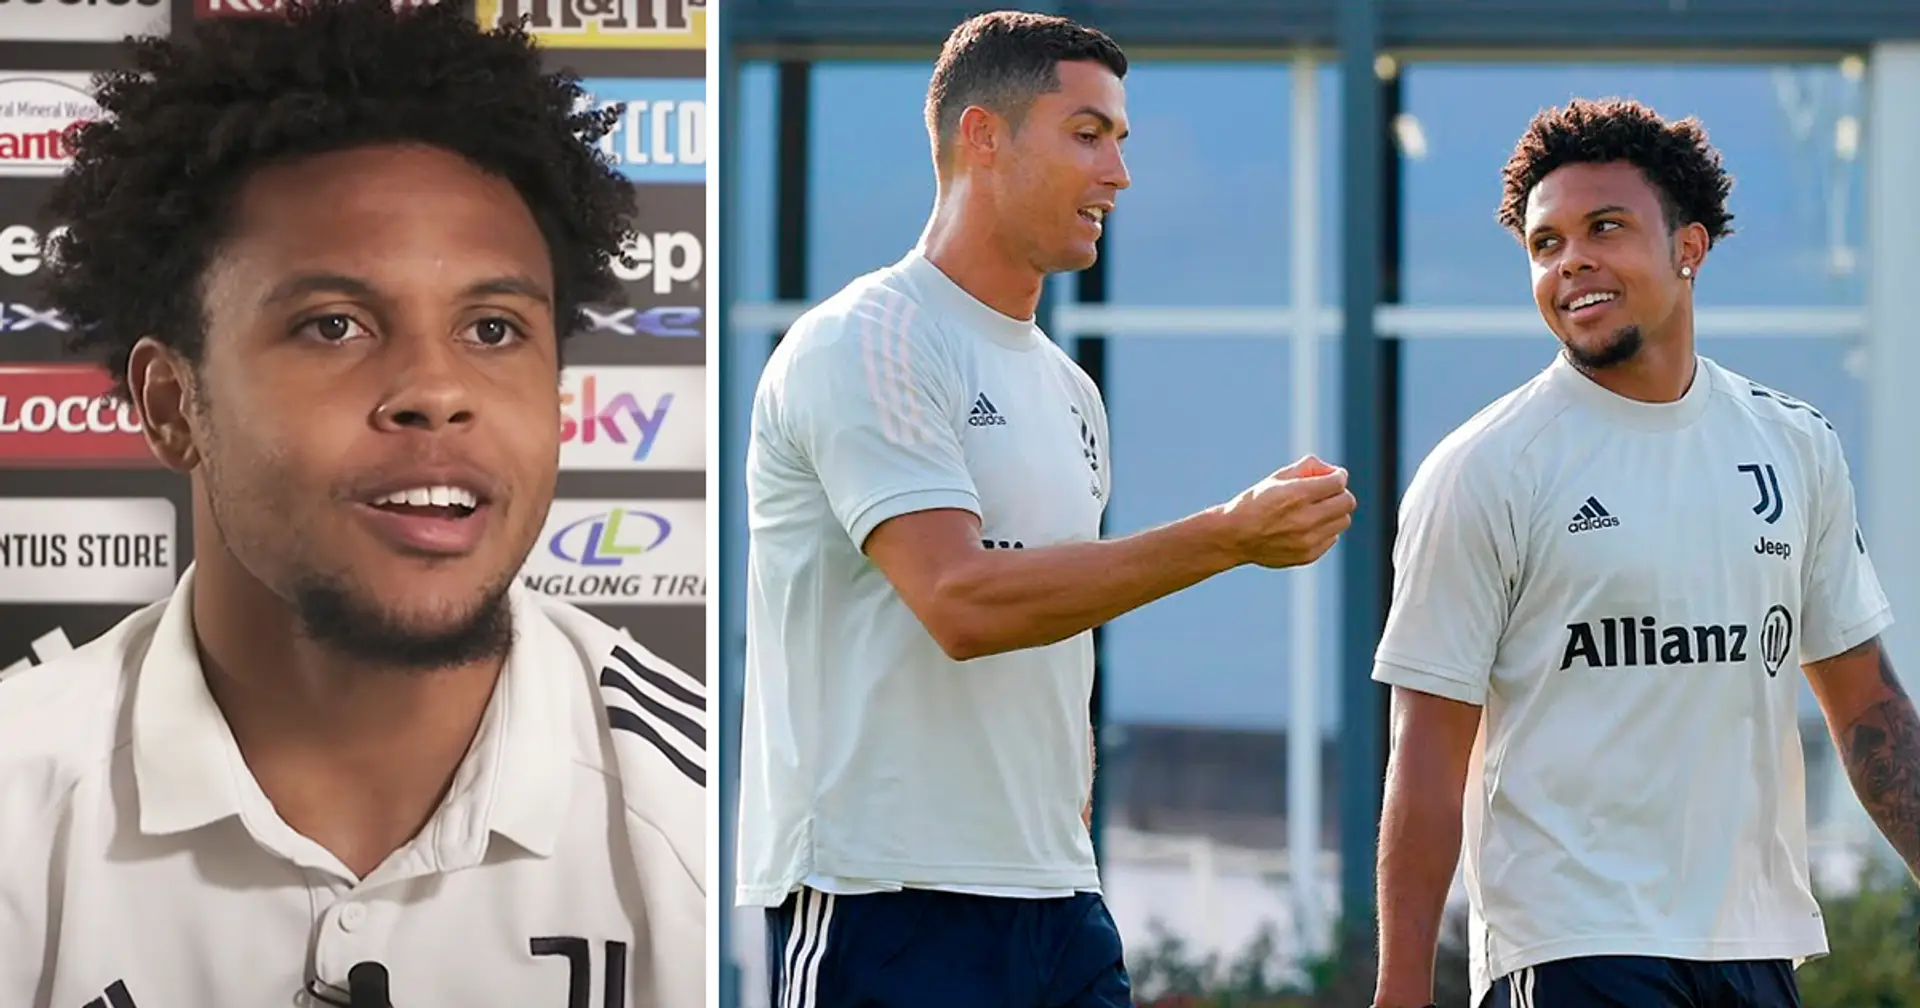 'Oh my gosh, your feet look terrible': McKennie reveals Cristiano Ronaldo's reaction when he criticized the Portuguese for his legs